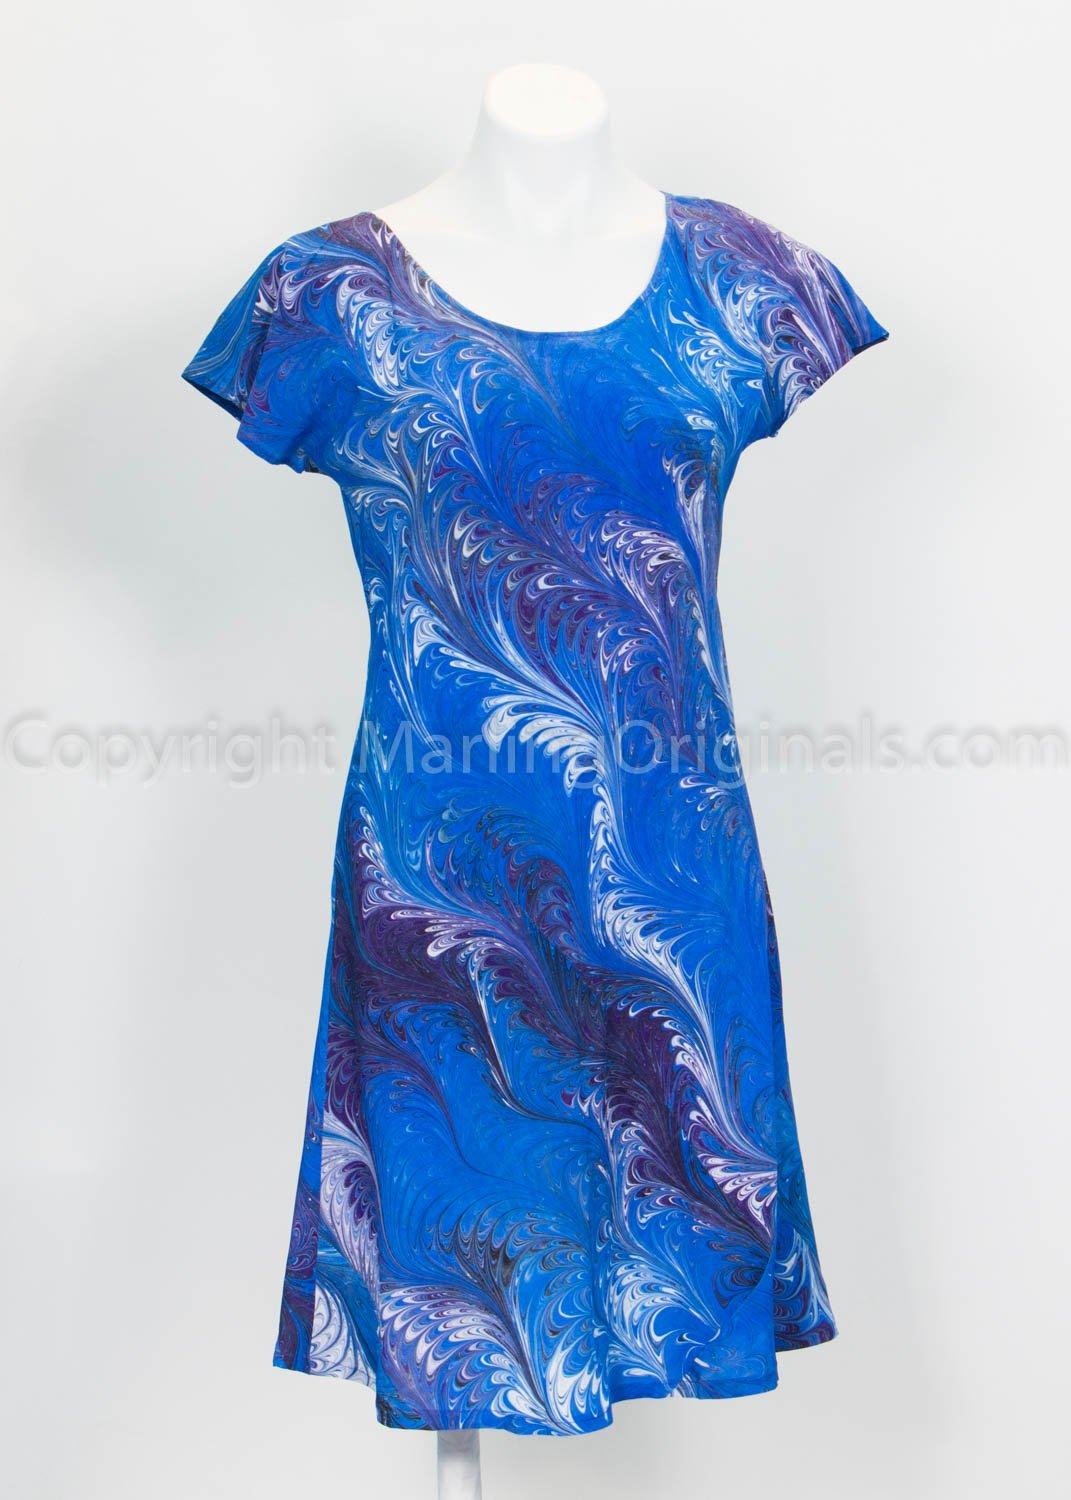 dress for smart casual marbled in blues and purple s